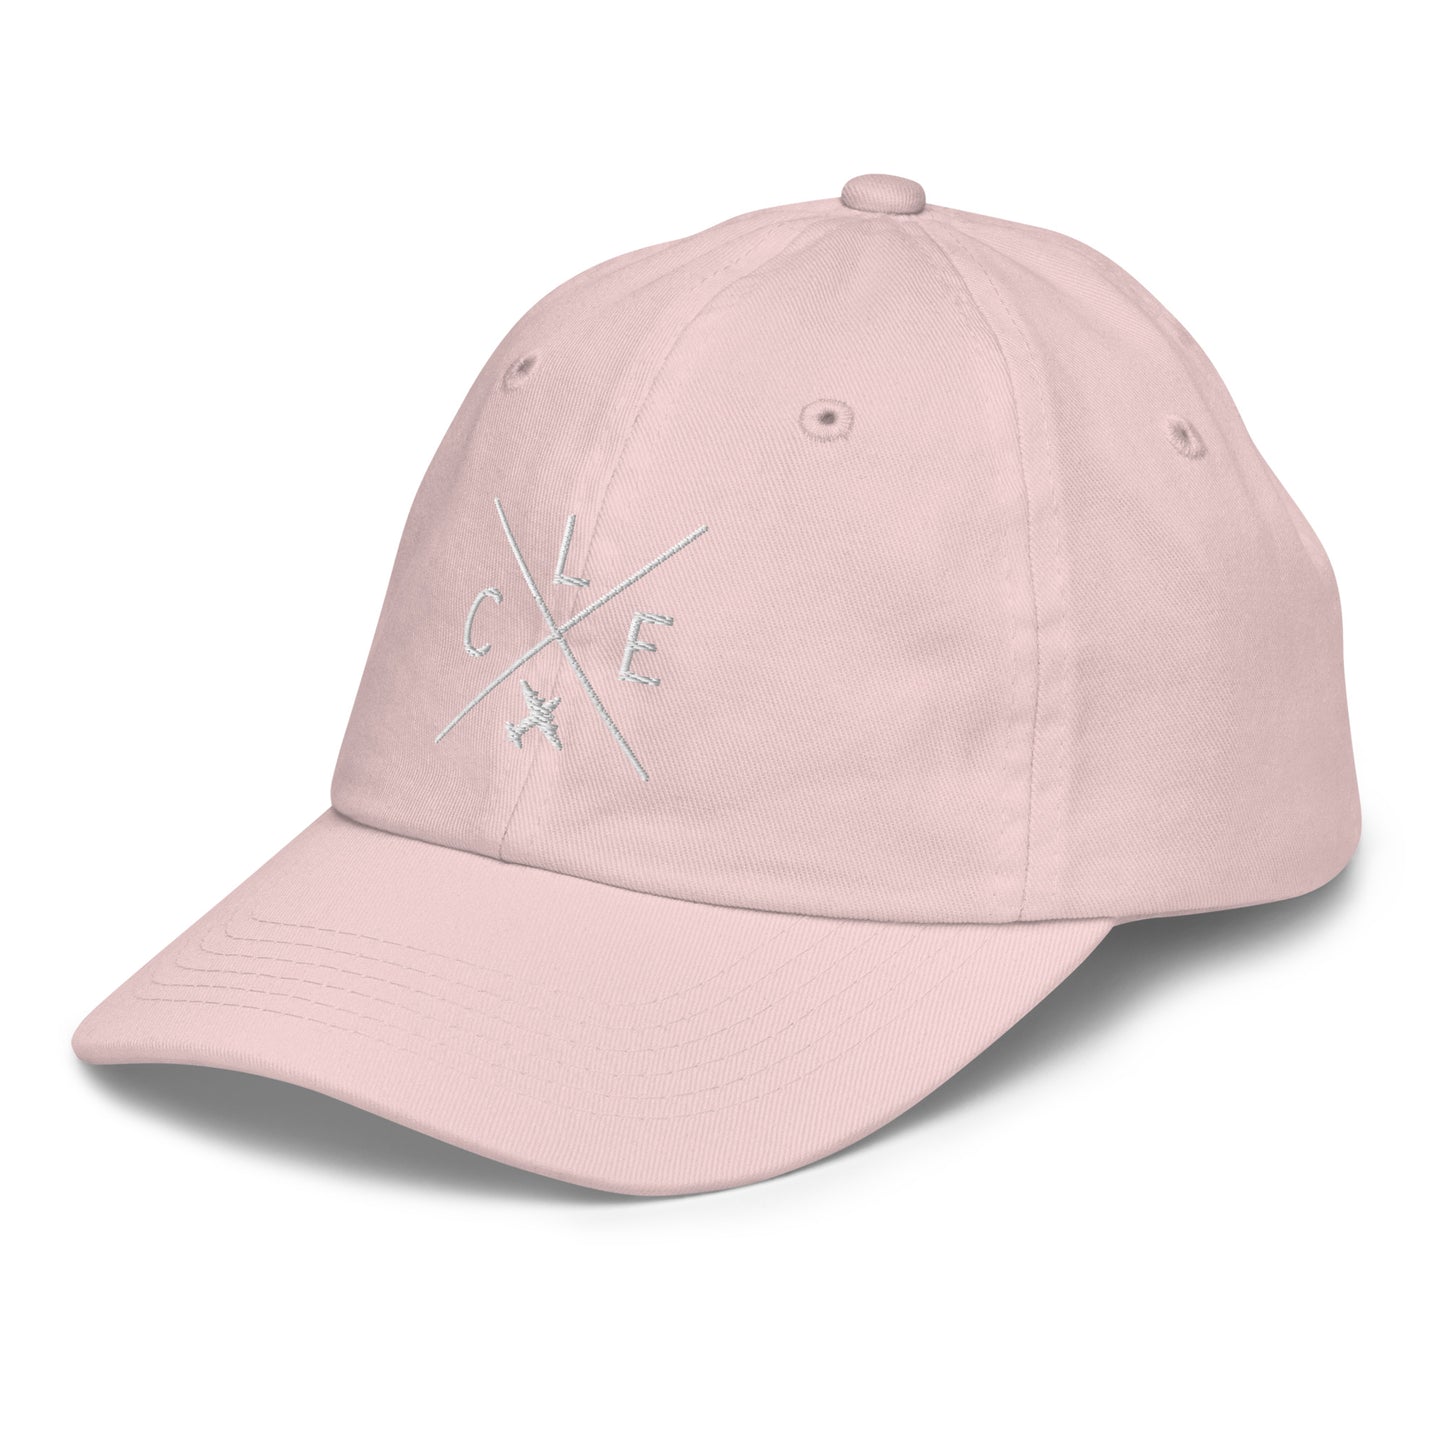 Crossed-X Kid's Baseball Cap - White • CLE Cleveland • YHM Designs - Image 33